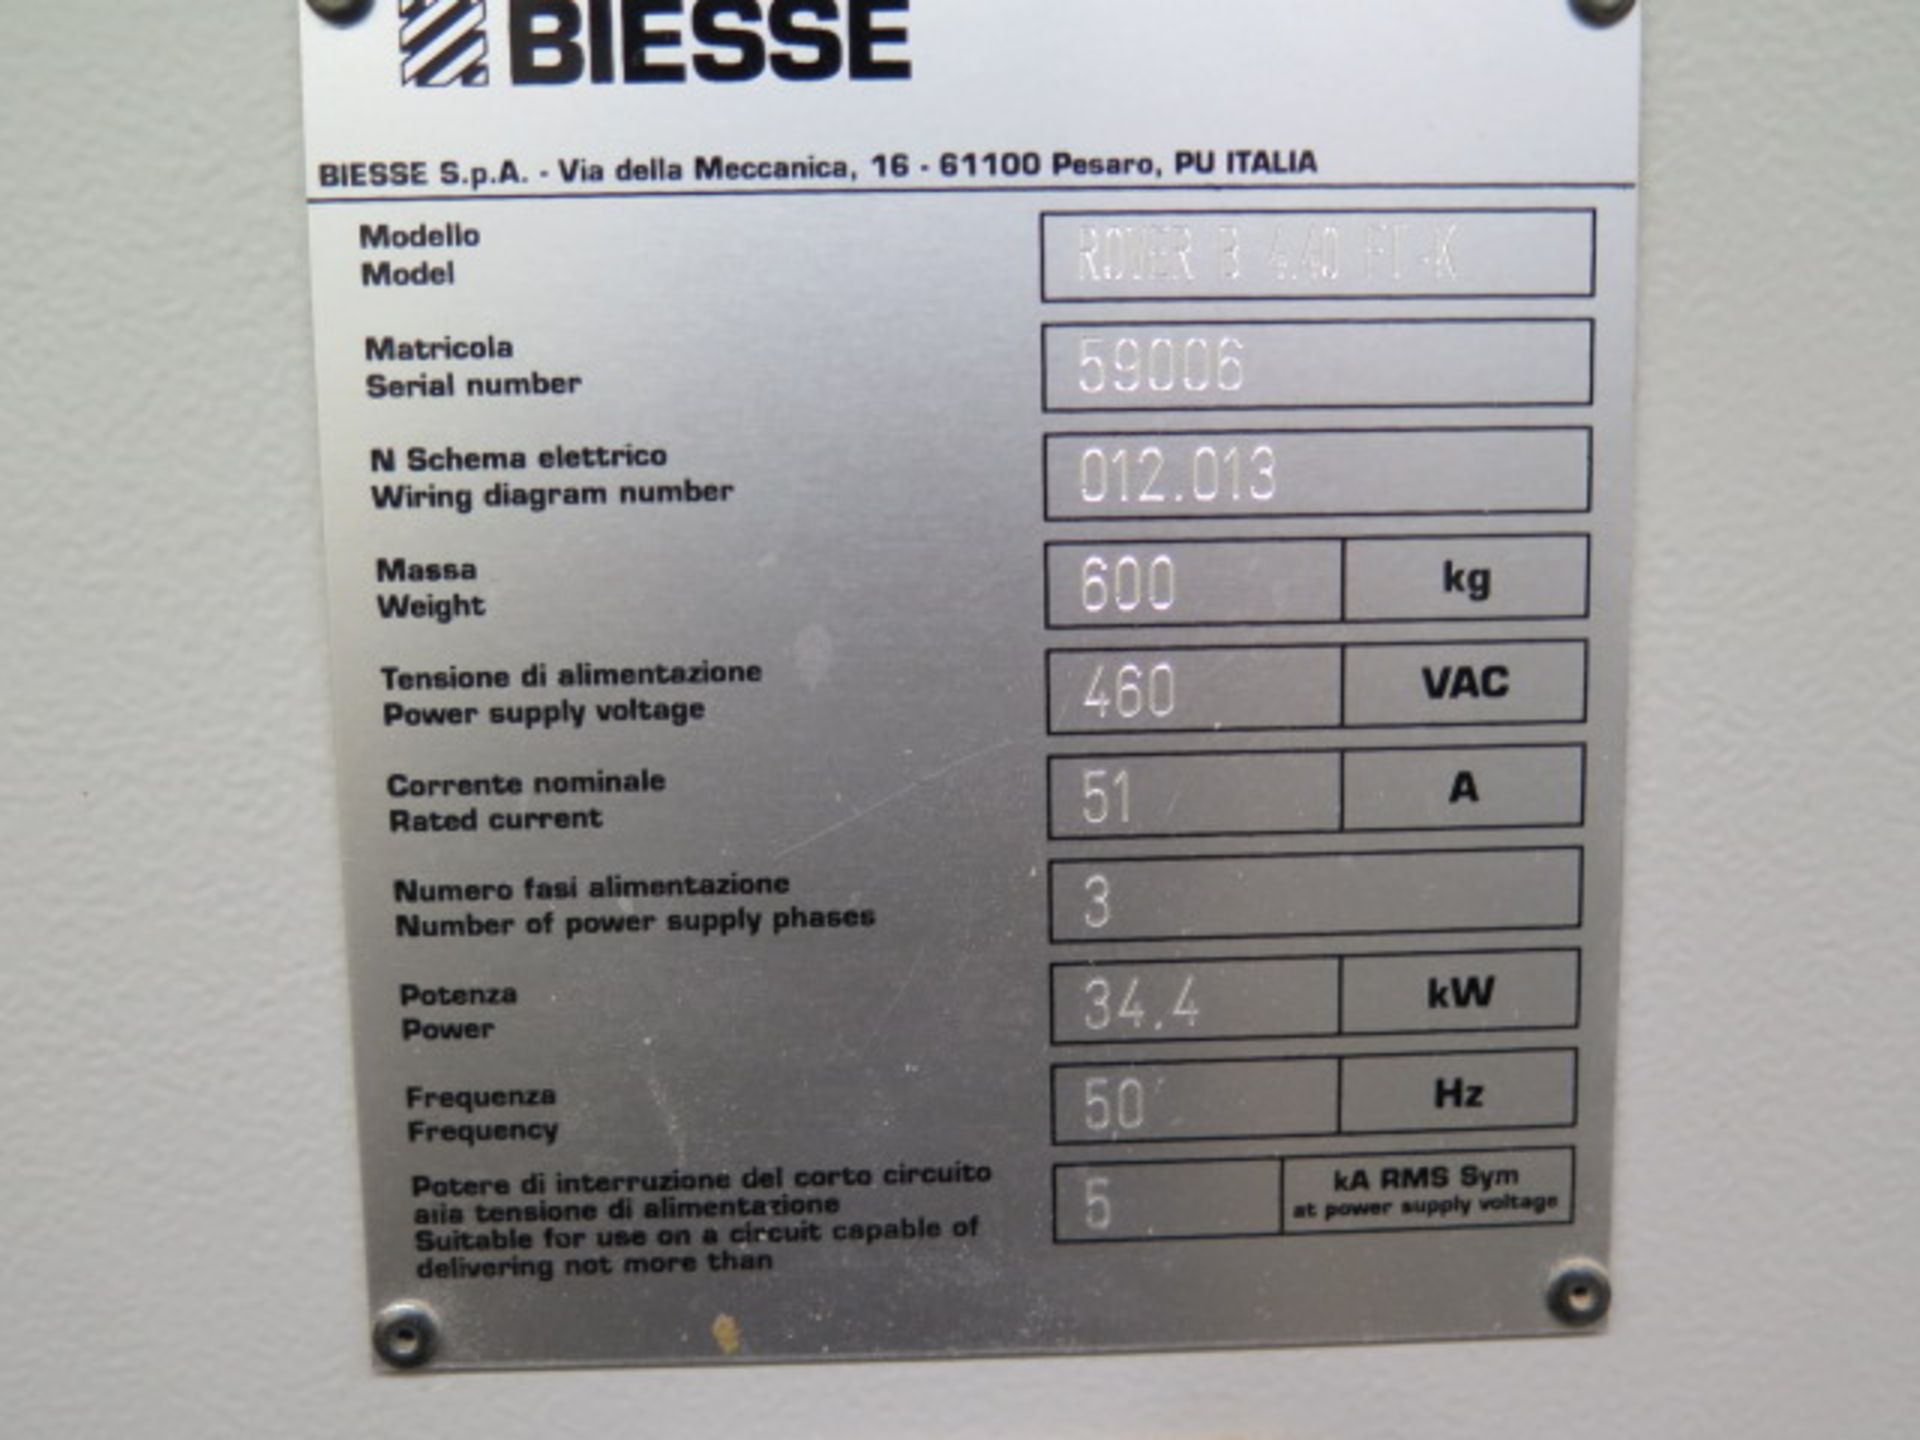 2006 Biesse Rover B4.40 FT-K 16-Spindle CNC Router s/n 59006 w/ Biesse CNC Controls, SOLD AS IS - Image 24 of 24